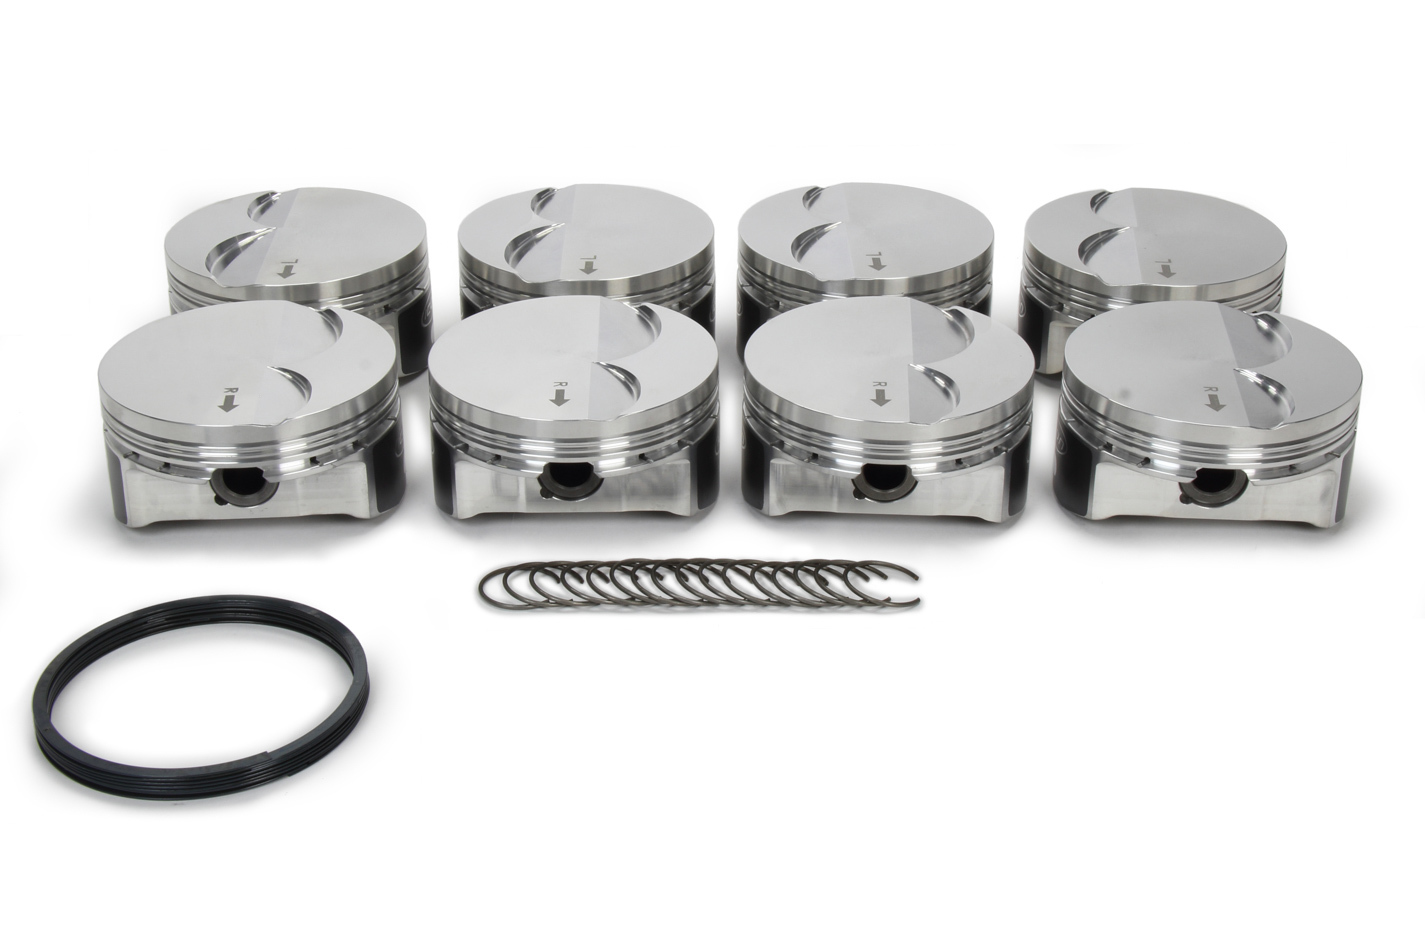 Icon Pistons IC552C.020 Piston, Premium Forged, Forged, 4.020 in Bore, 1.2 x 1.2 x 3.0 mm Ring Groove, Minus 4.00 cc, GM LS-Series, Set of 8